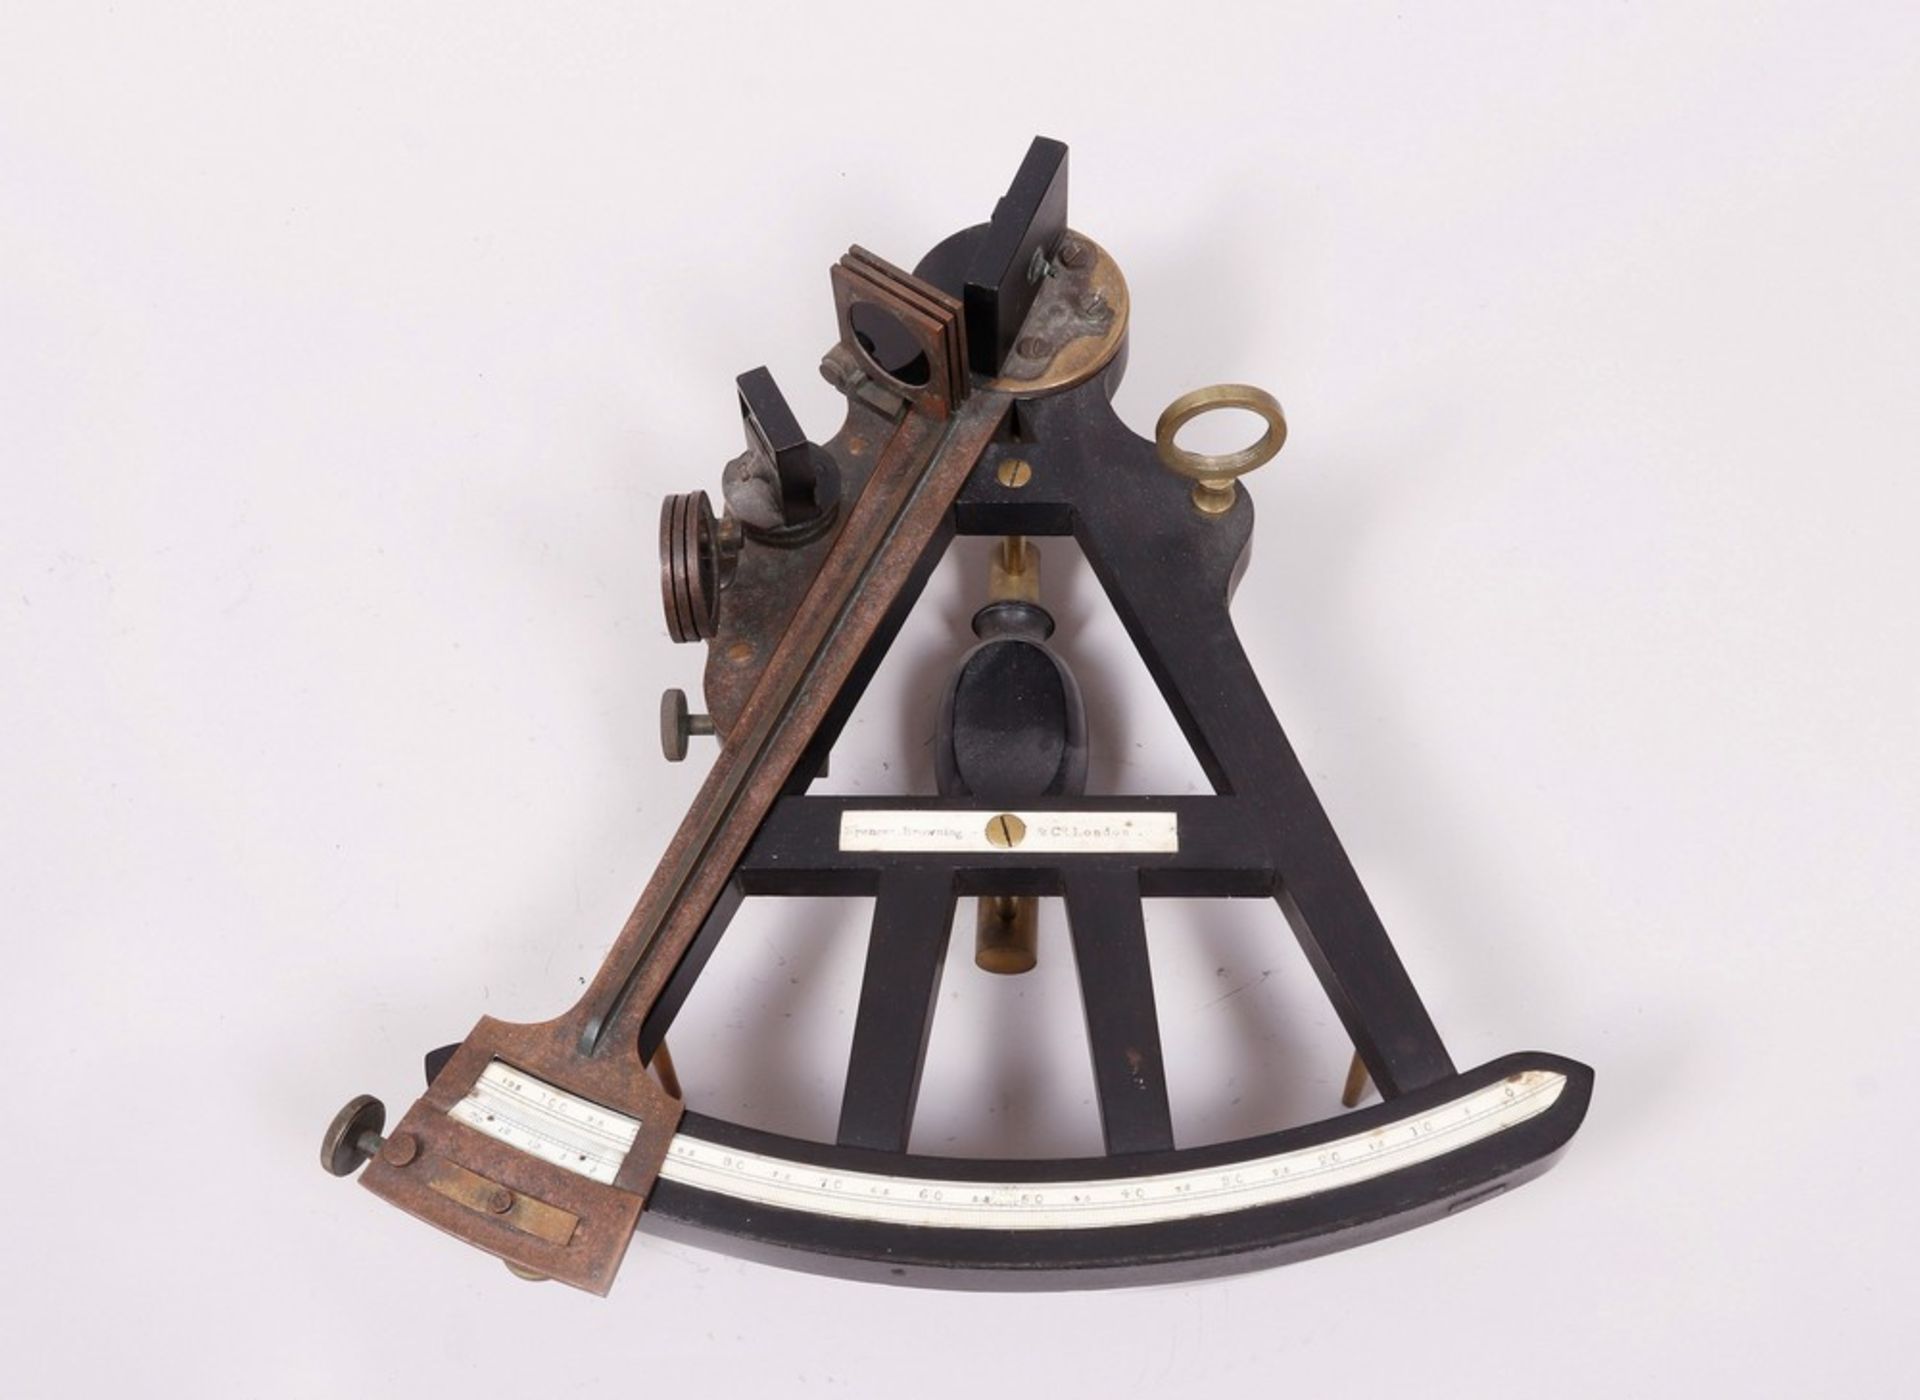 Octant in transport box, Spencer Browning & Co., London, early 19th C. - Image 2 of 5